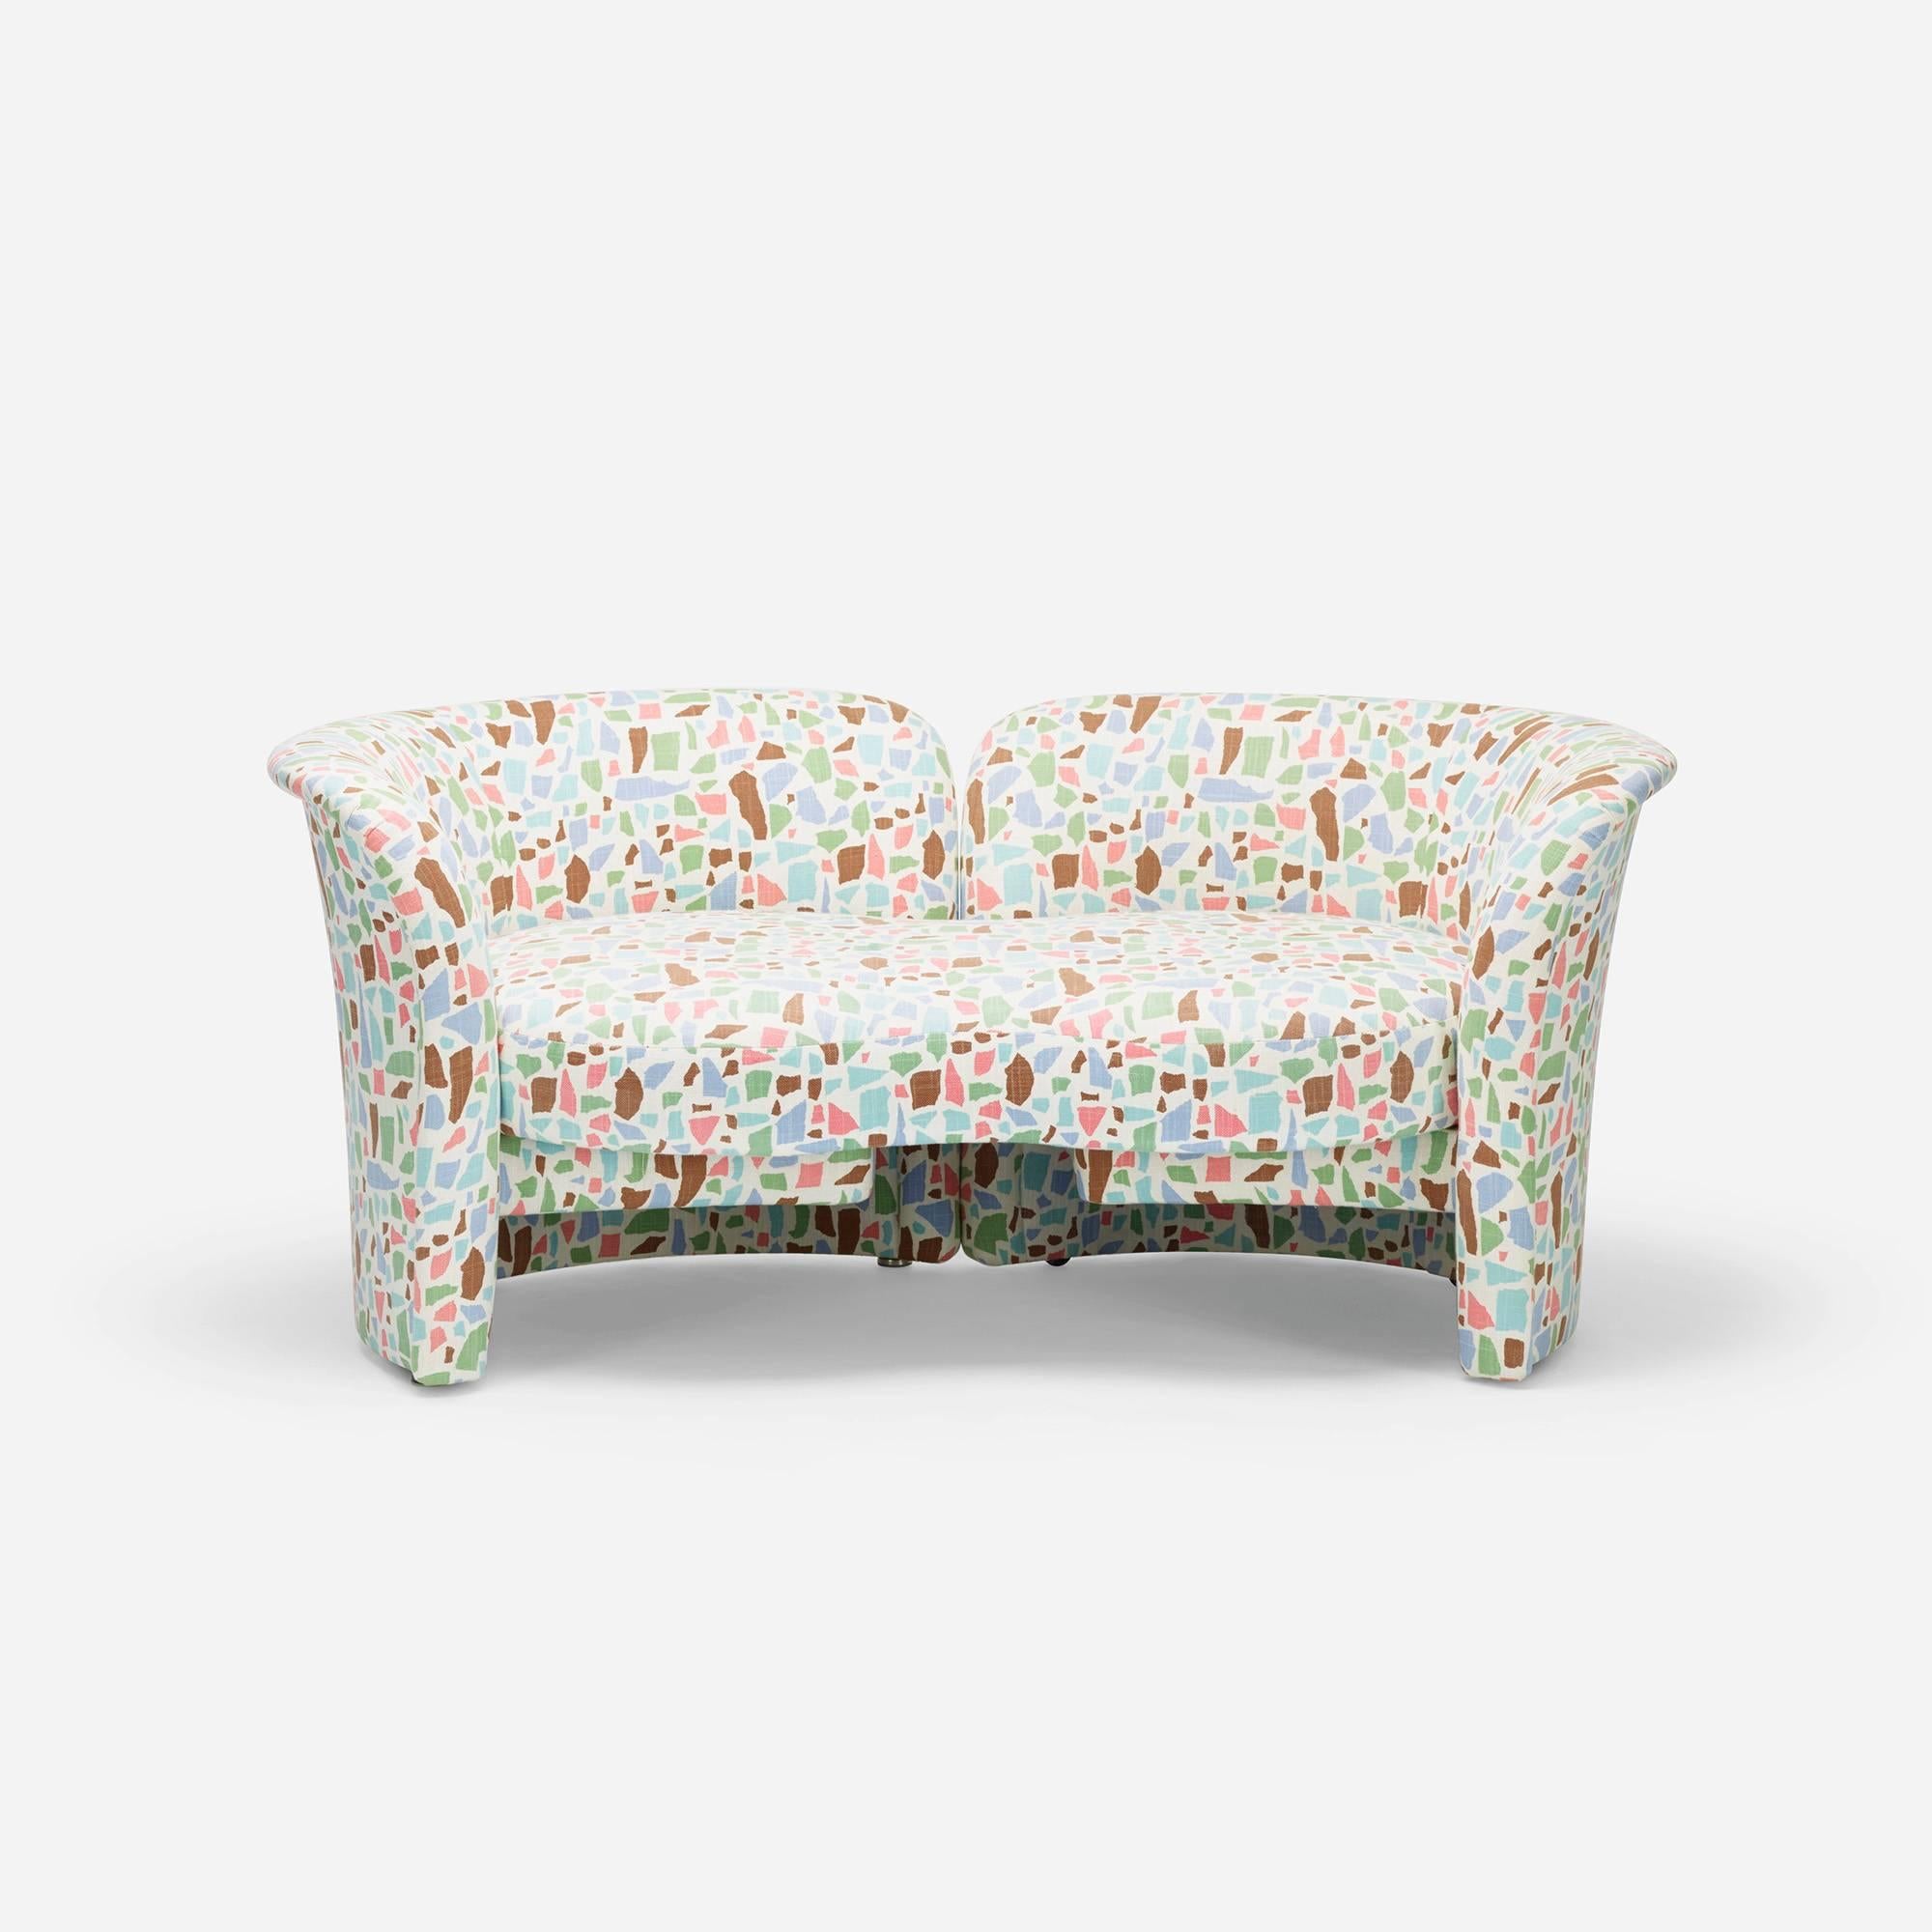 One arm is fixed and the other is on a swivel allowing the piece to function as a settee or a tete-a-tete. Upholstered in a linen fabric by Lulu DK.